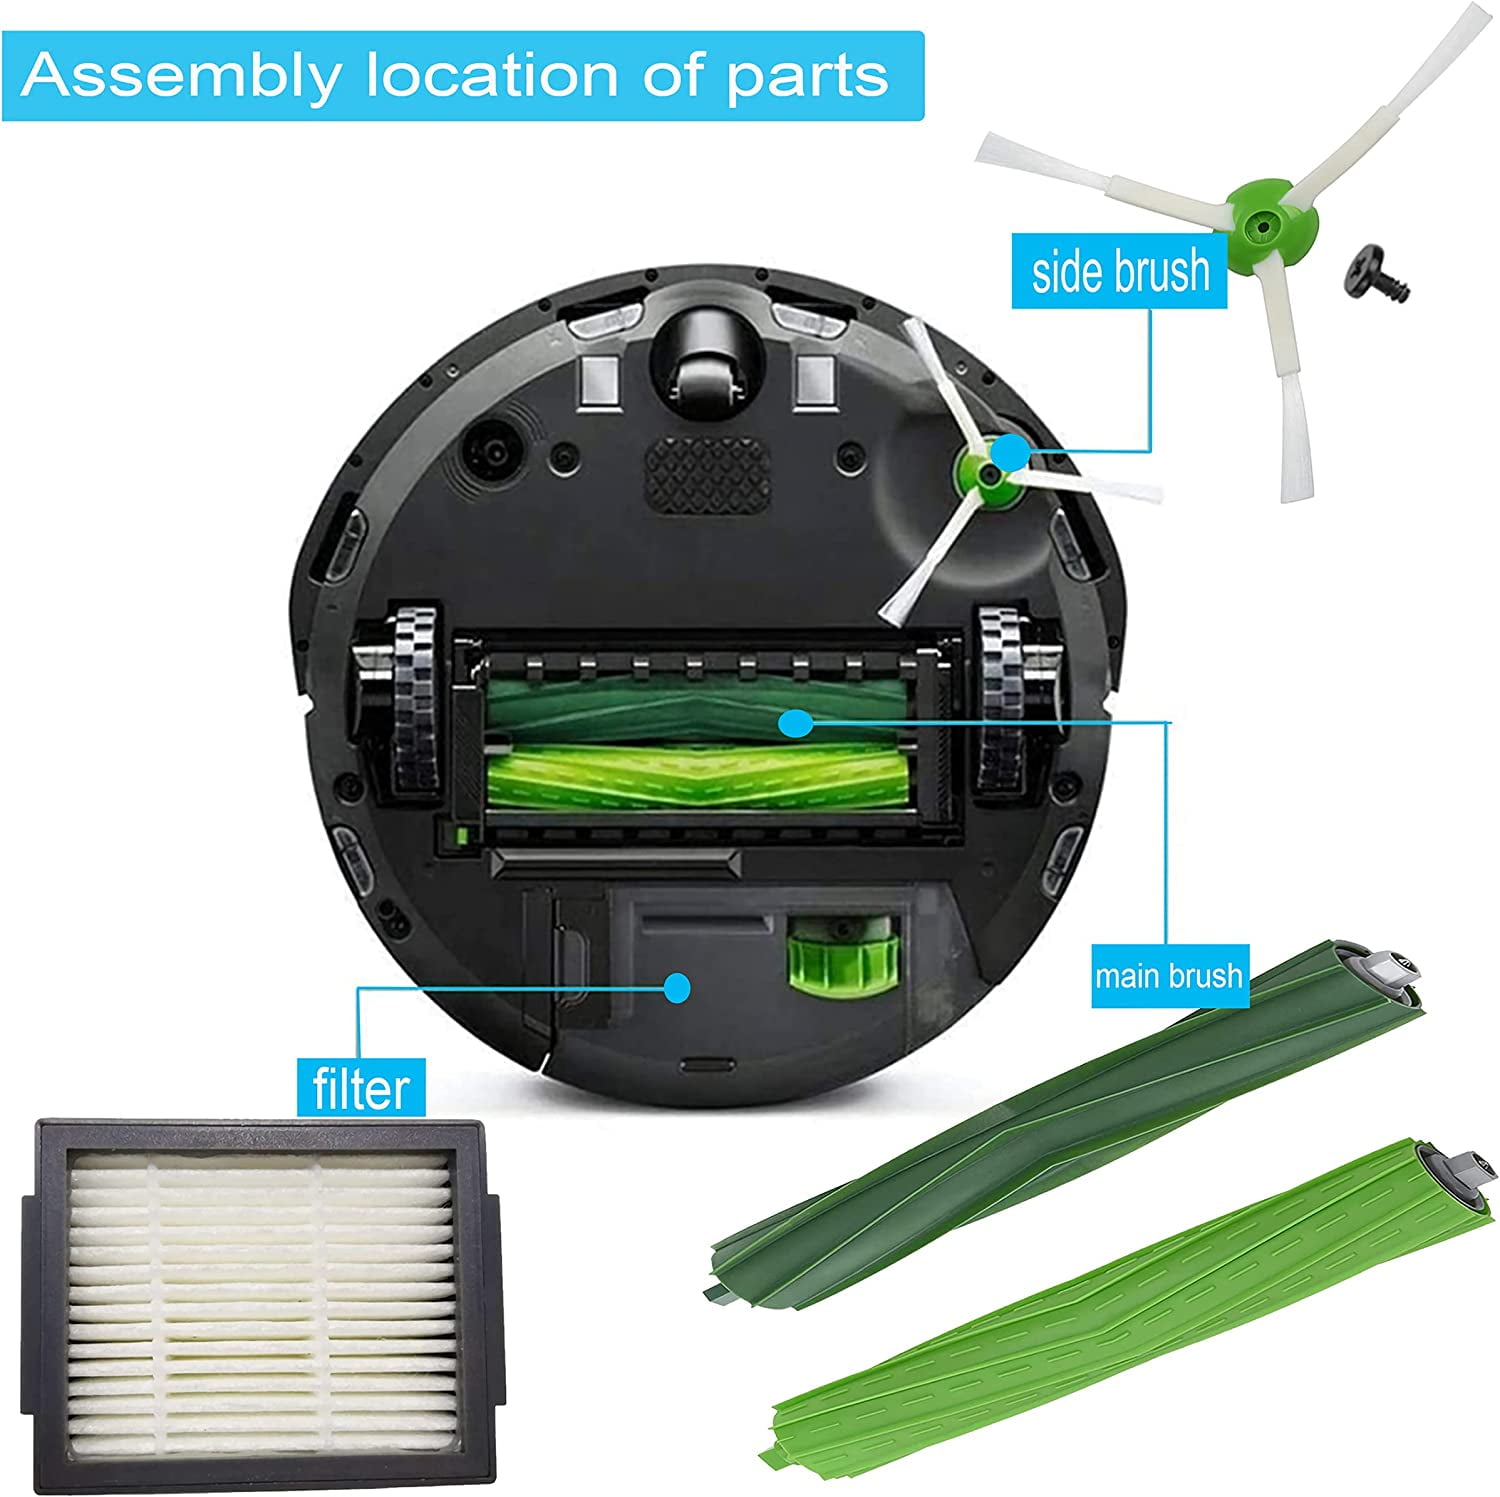 Kit of 3 Empty Bags + 3 HEPA Filters + 3 Side Brushes for Roomba S Series